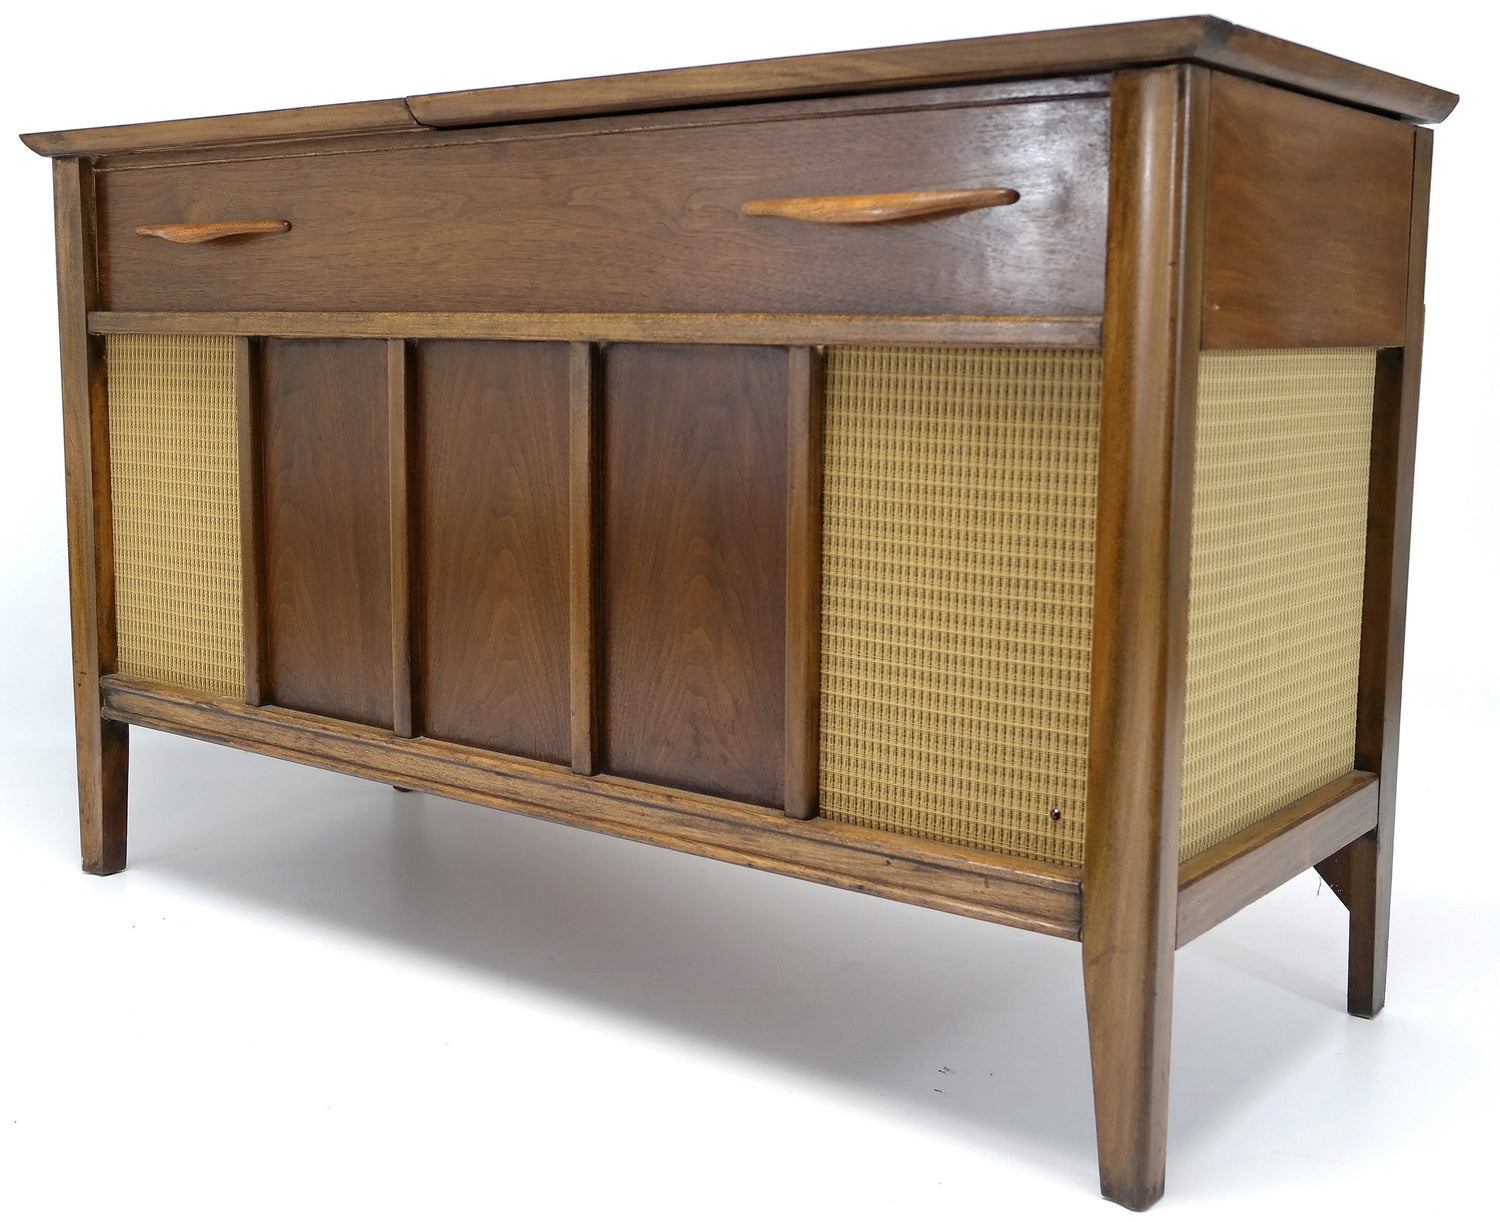 Mid Century Modern STEREO CONSOLE - 60's - Record Player - Bluetooth - AM FM Tuner The Vintedge Co.